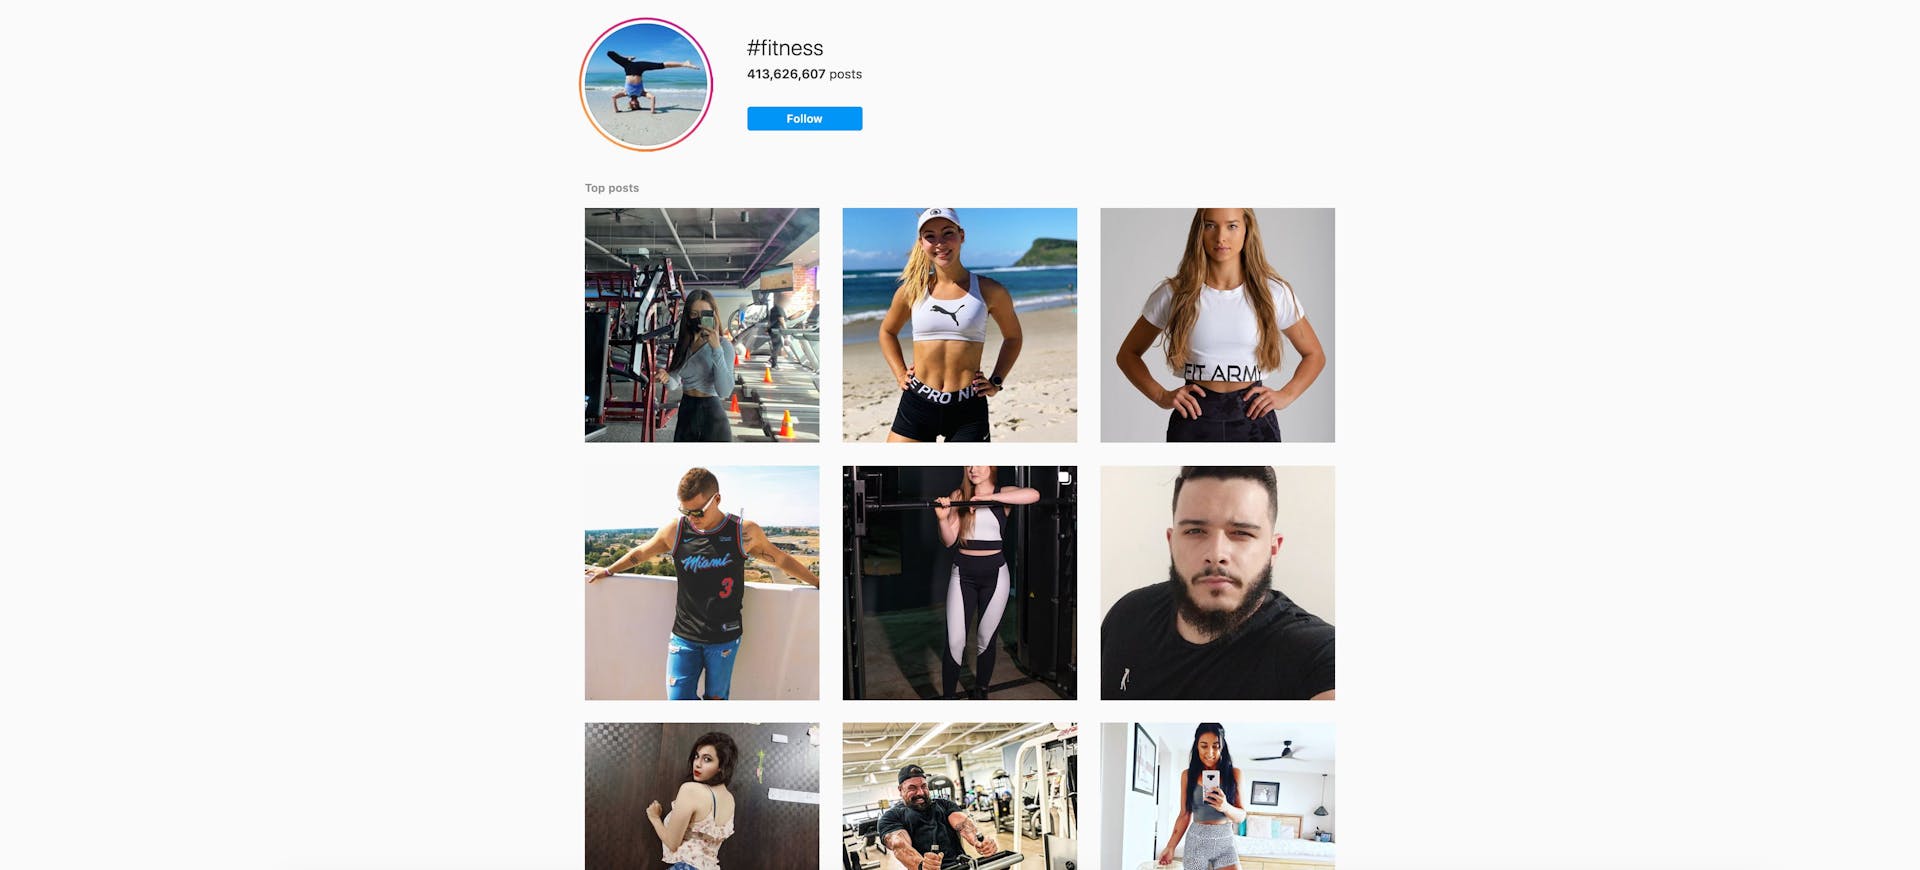 The feed for the #fitness hashtag on Instagram: users are able to view any post that includes the tag, including public Instagram Stories or sponsored posts.